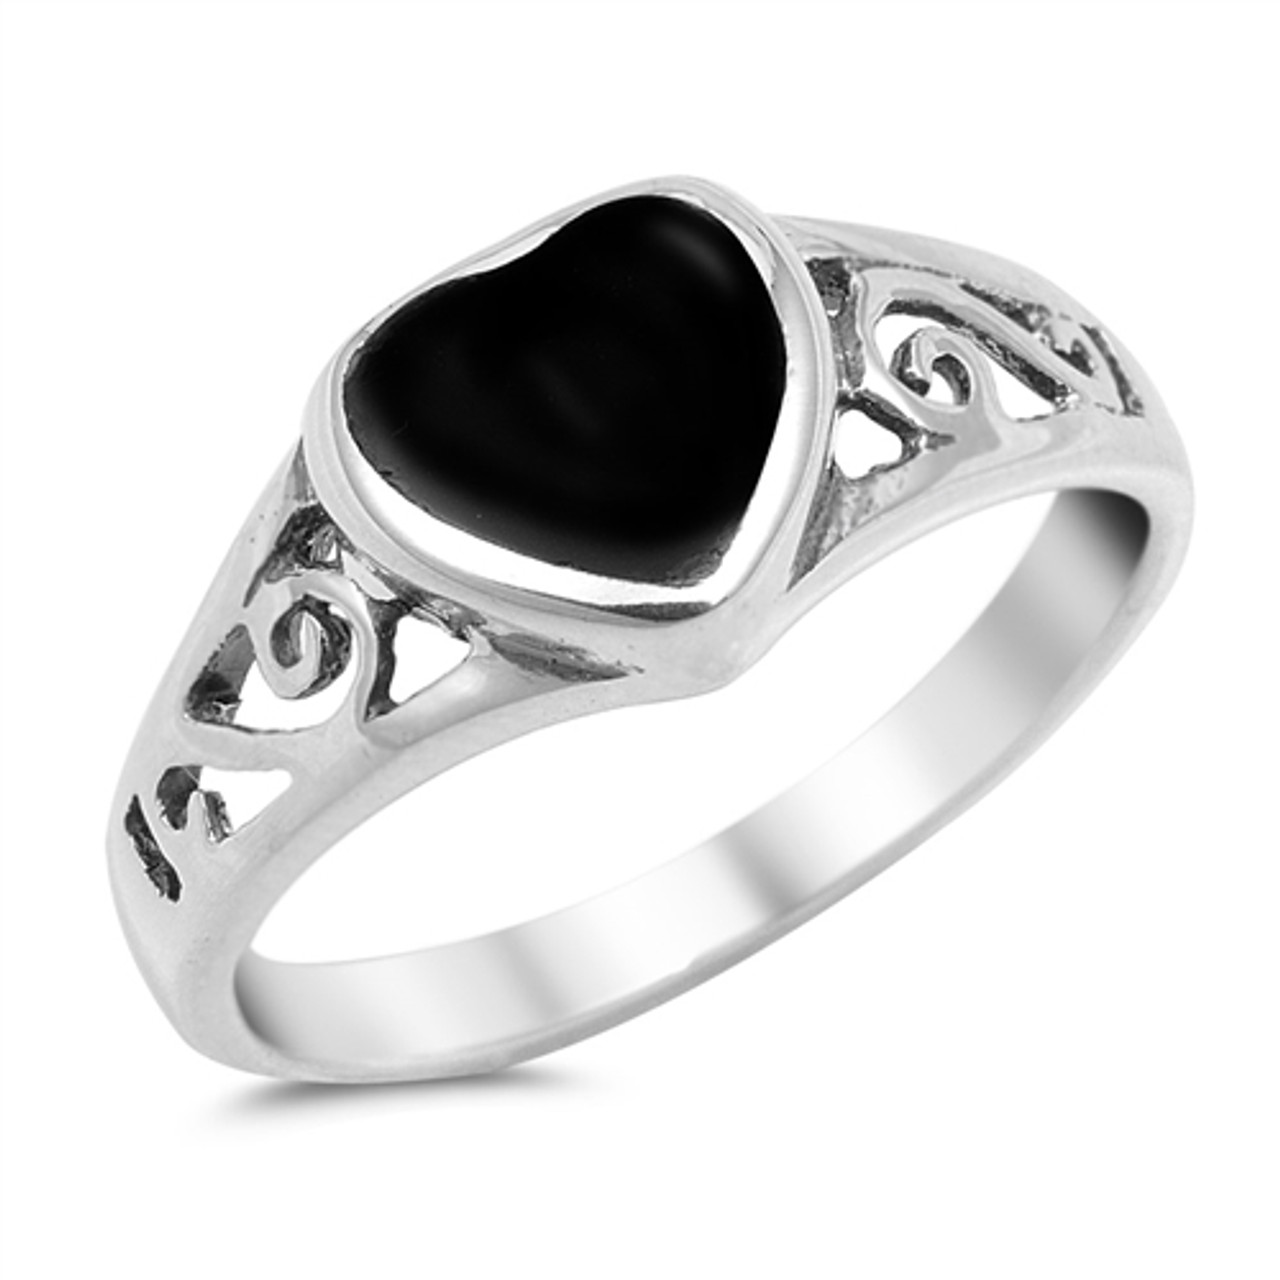 Heart Ring Genuine Solid Sterling Silver 925 Black Onyx Face Height 6 mm Size 9